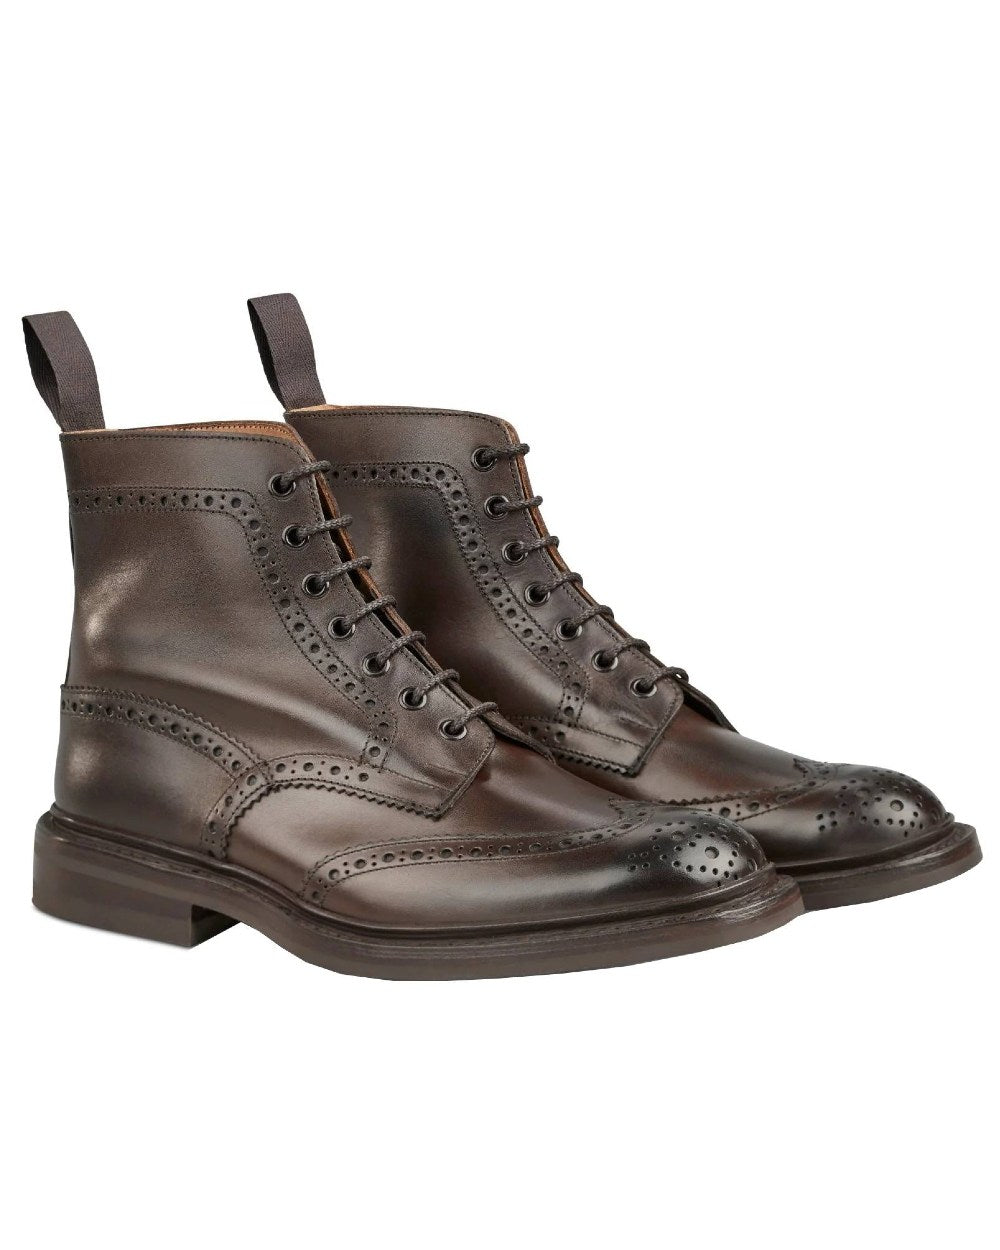 Espresso Burnished Coloured Trickers Stow Leather Sole Country Boot On A White Background 